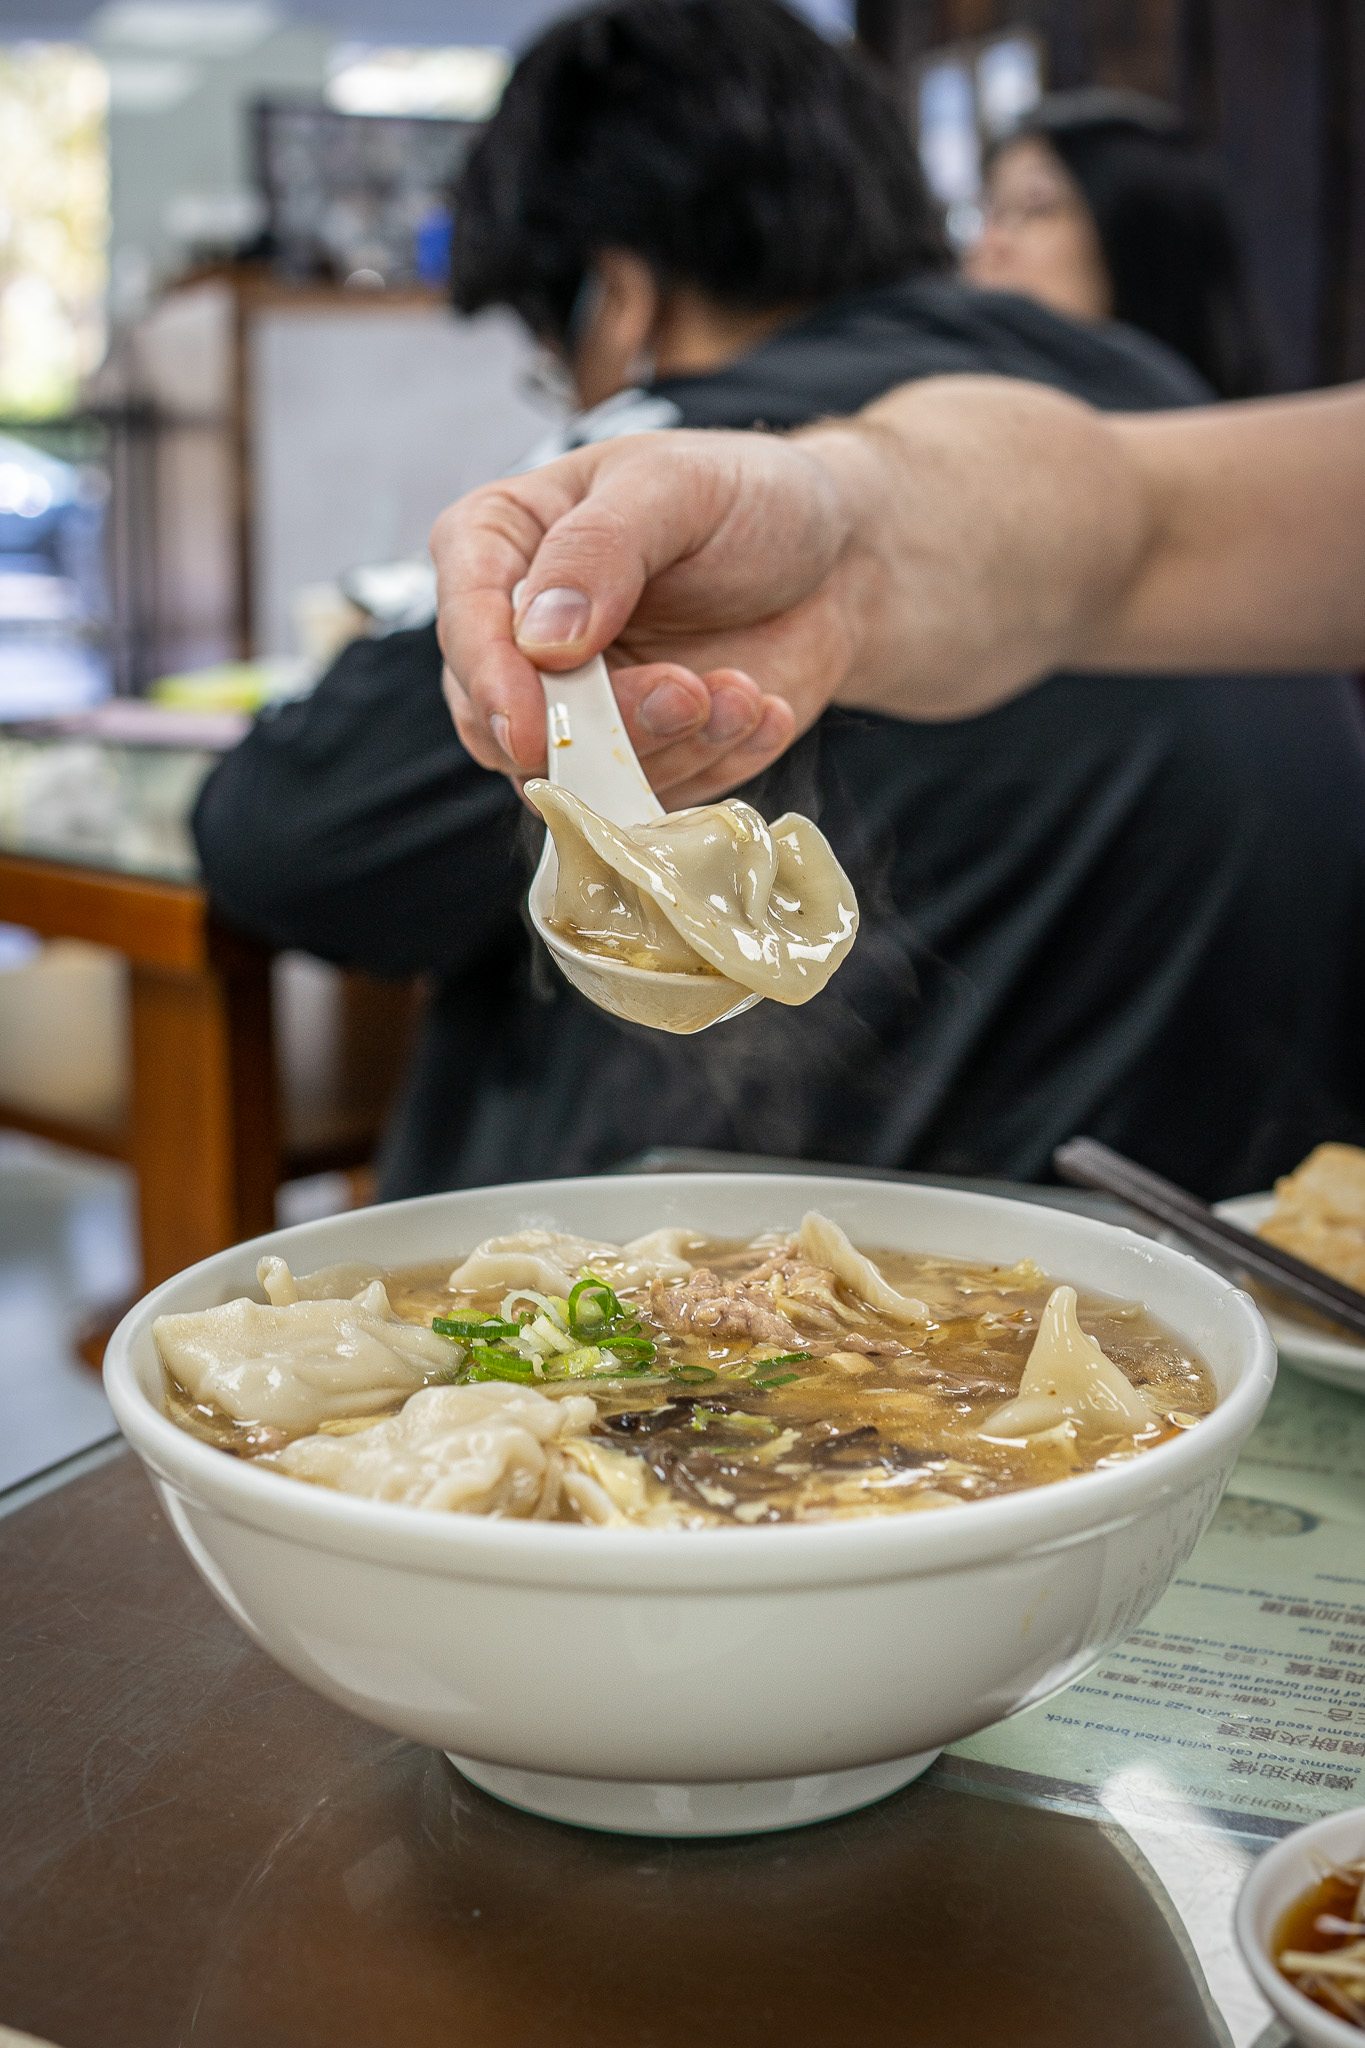 Dumplings in Hot and Sour Soup from taipei Taiwan